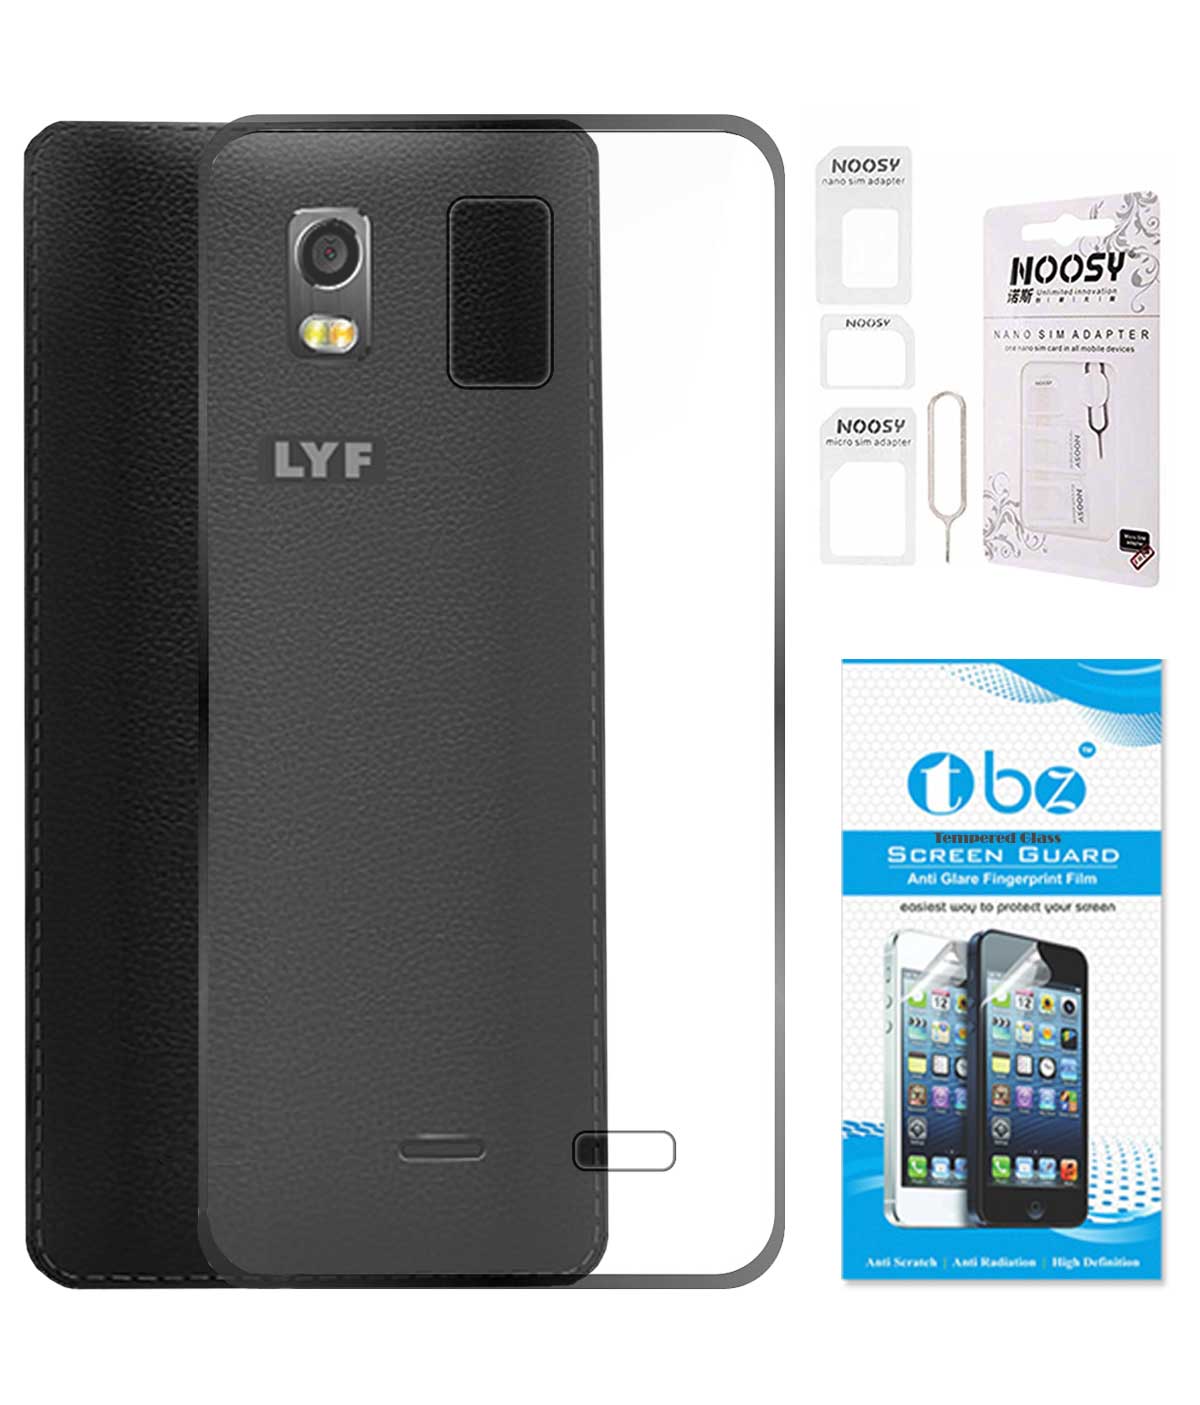 TBZ Transparent Silicon Soft TPU Slim Back Case Cover for Lyf Water 10 with Nossy Sim Adaptor and Tempered Screen Guard